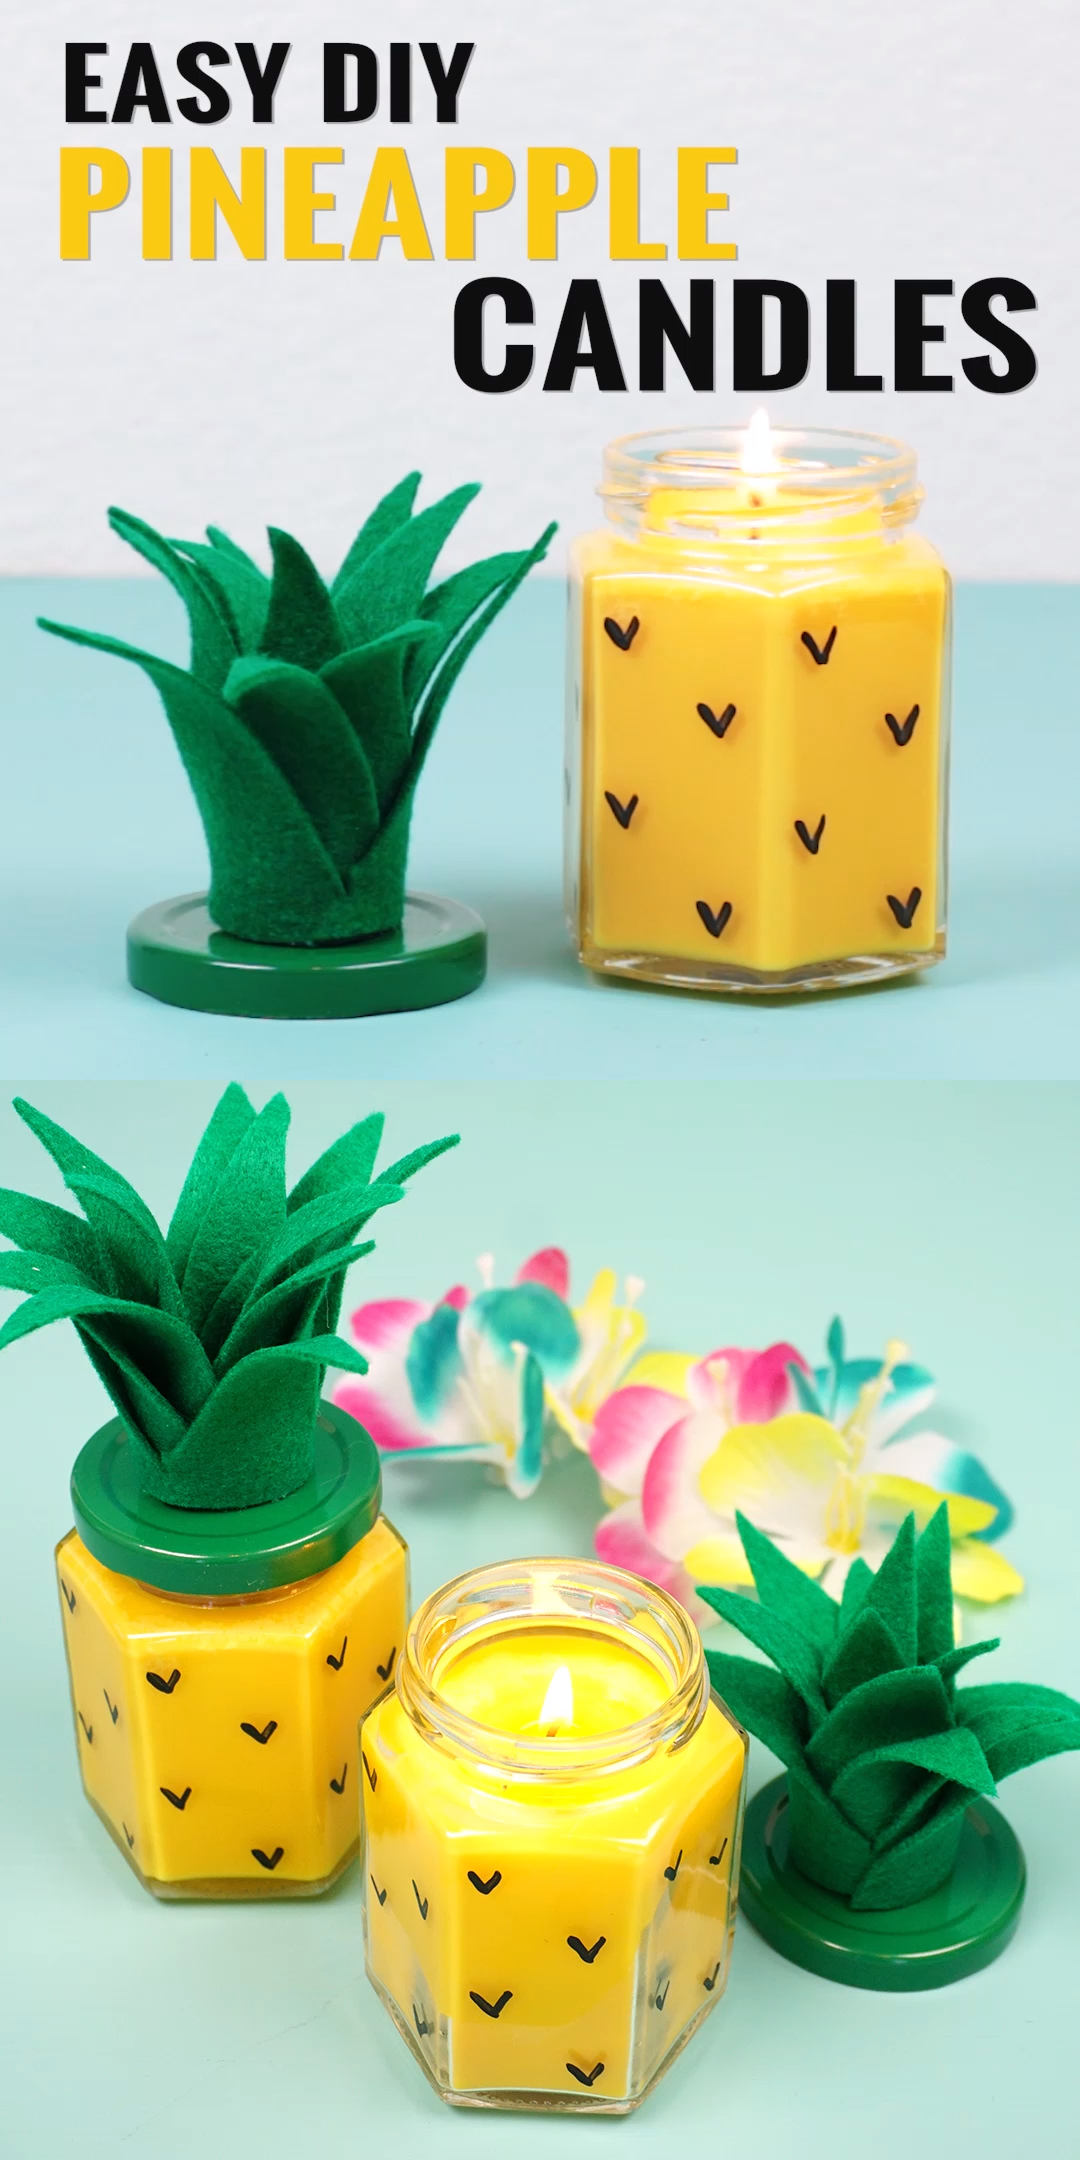 Easy DIY Pineapple Candles -   18 creative homemade crafts
 ideas